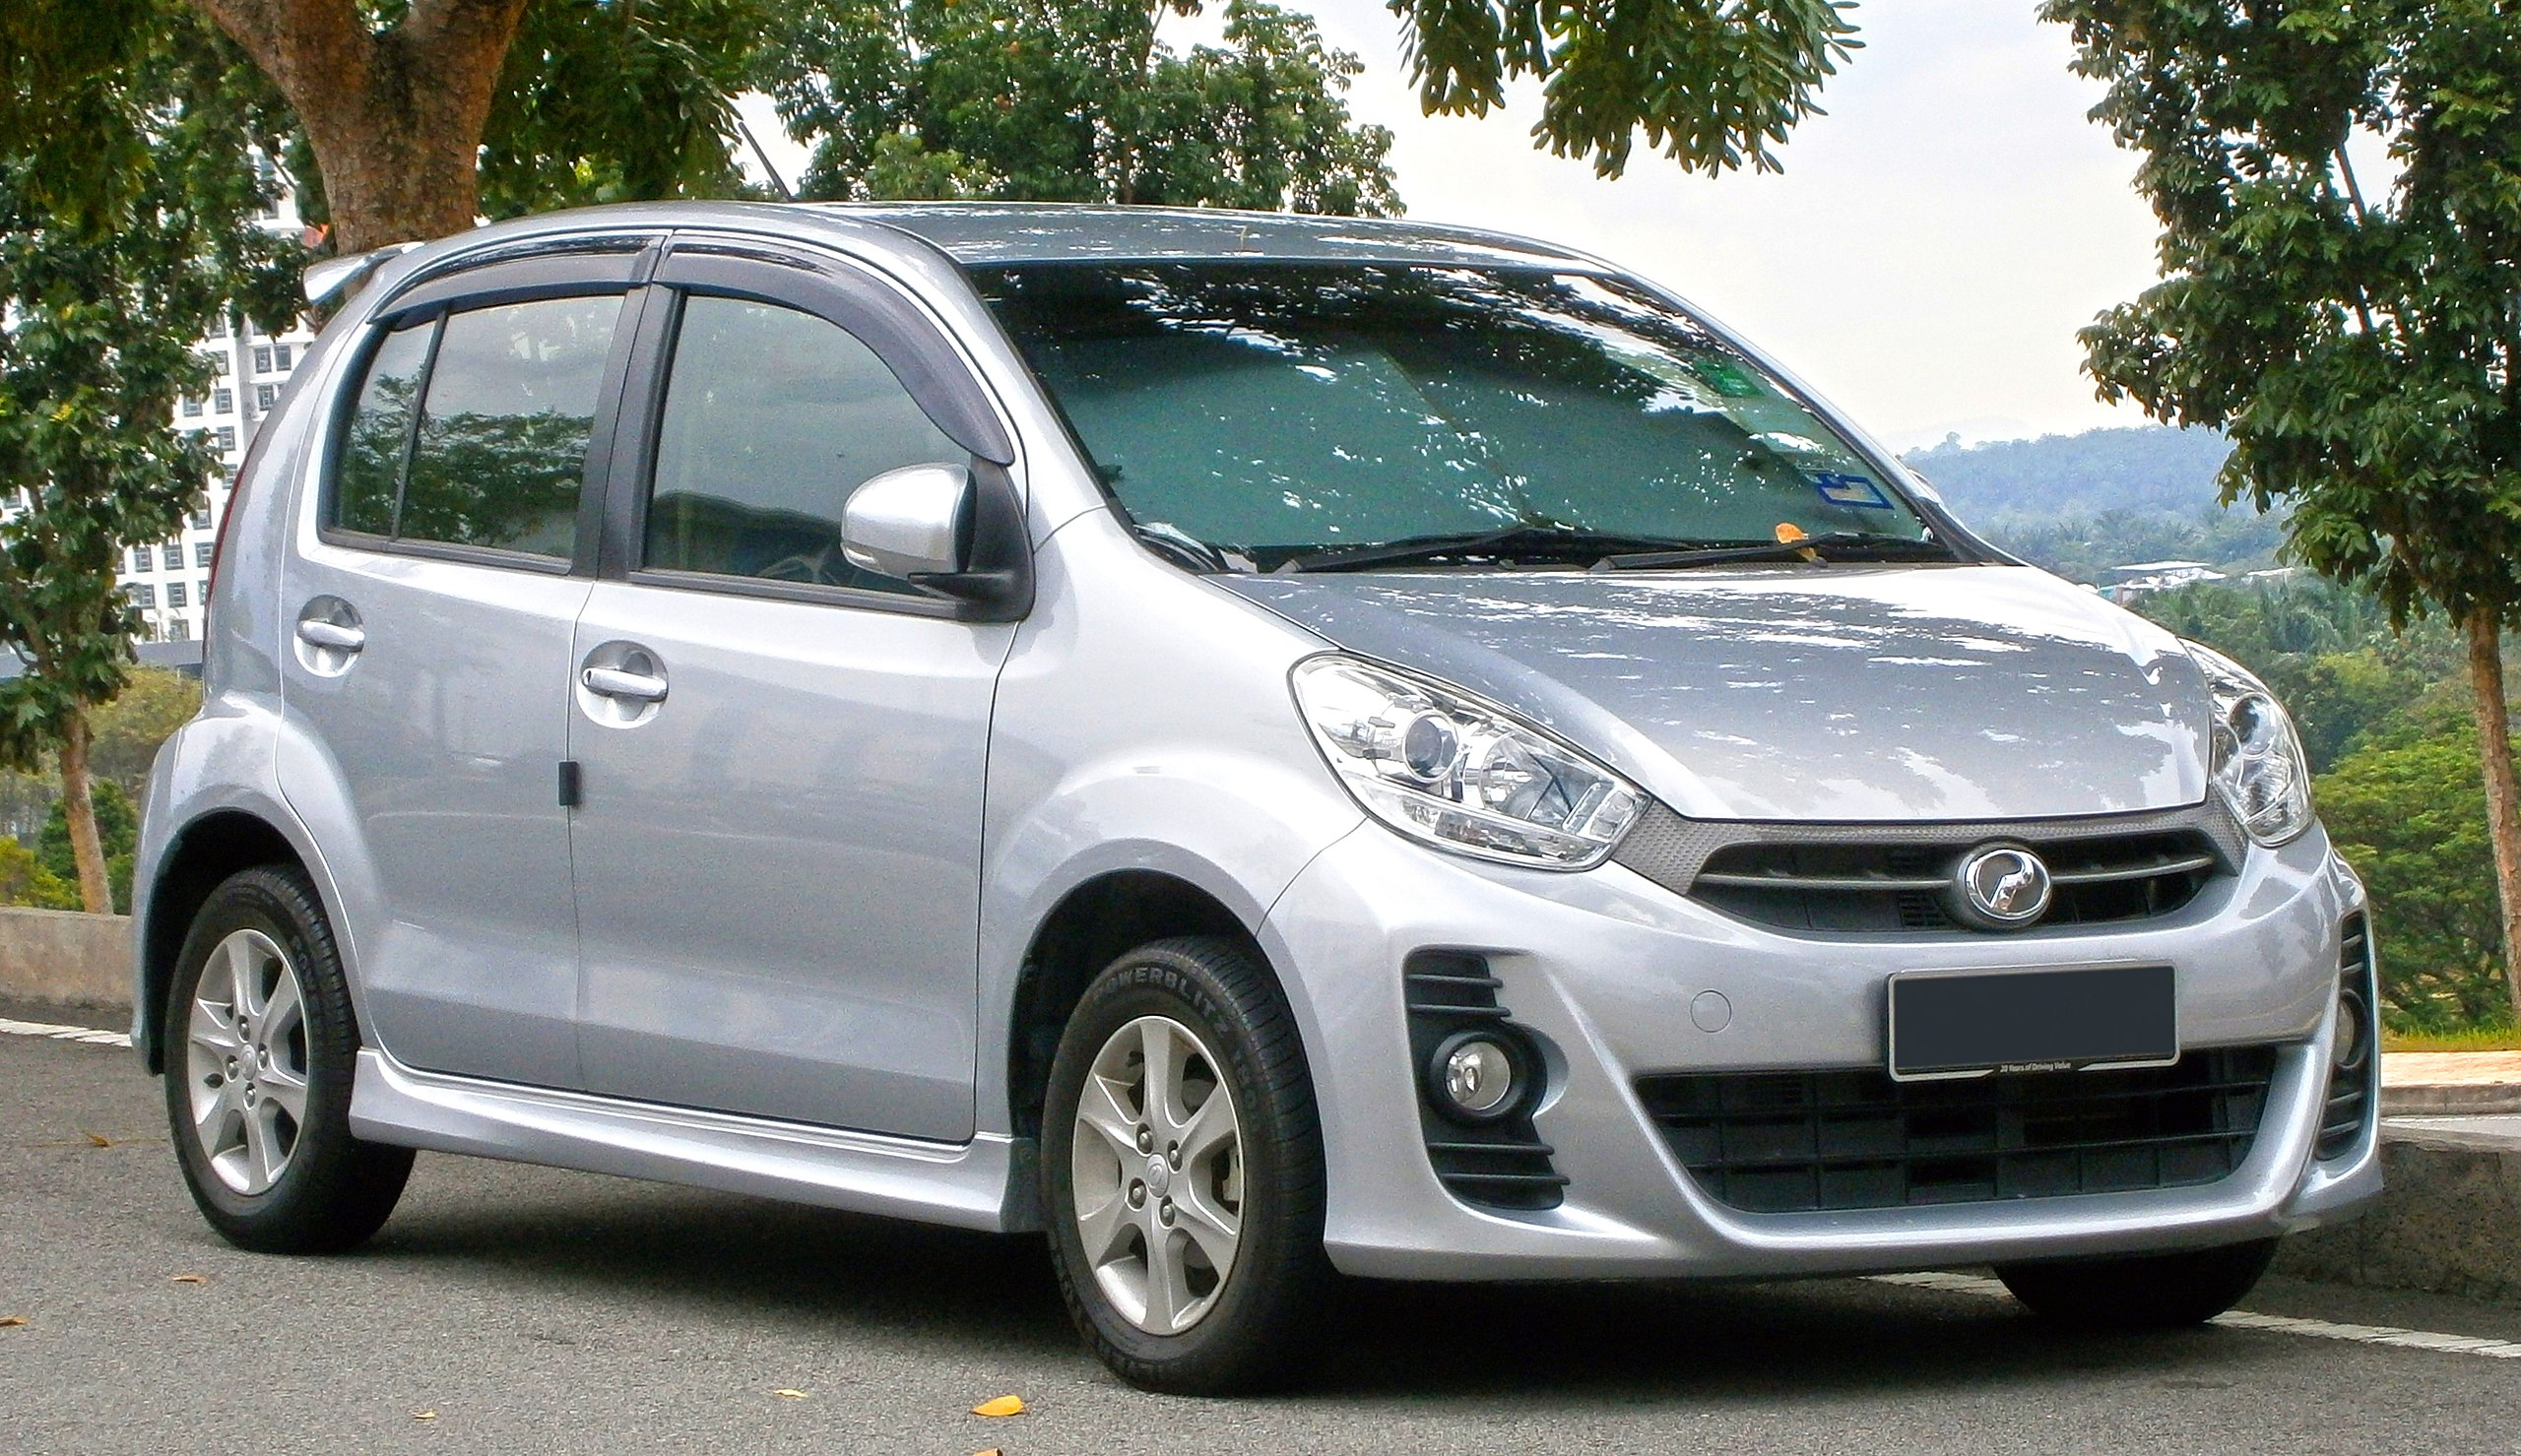 Perodua bezza is the best selling car in m’sia for 2023 so far, myvi ranked 2nd | weirdkaya